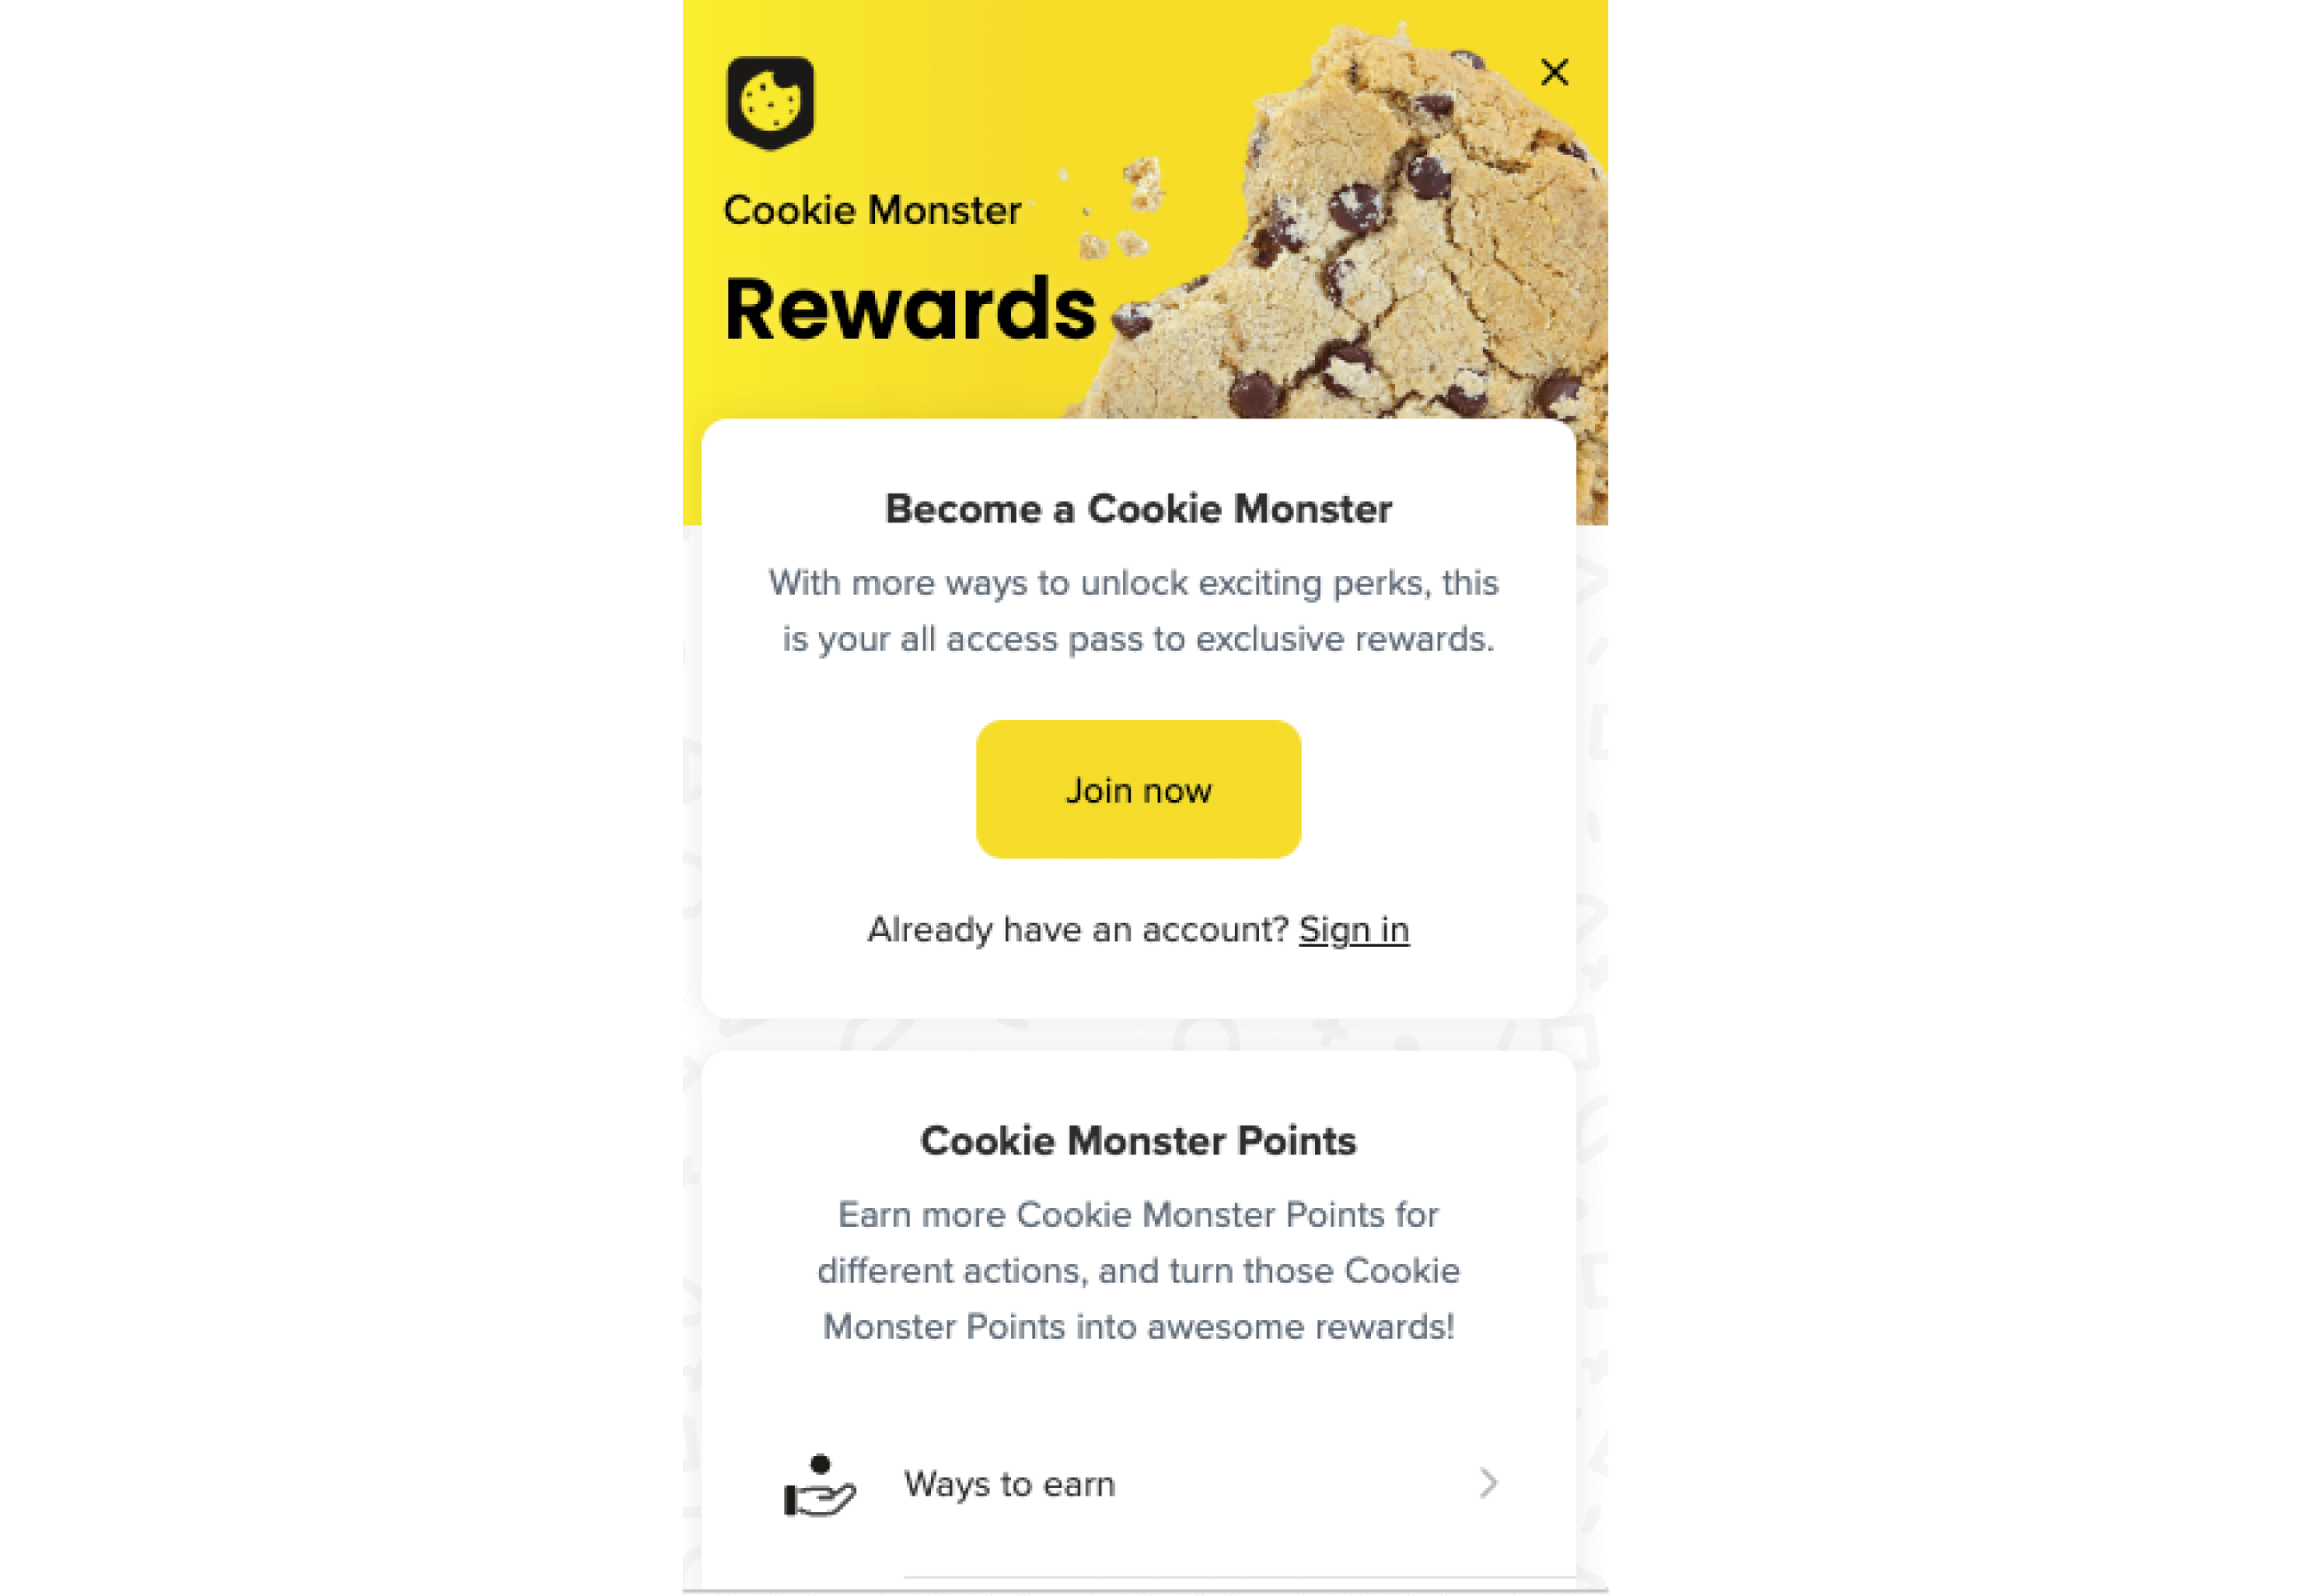 PNW Cookies rewards program panel showing an image of a chocolate chip cookie on a bright yellow background. The CTA is "Become a Cookie Monster" and the points section title is "Cookie Monster Points". 